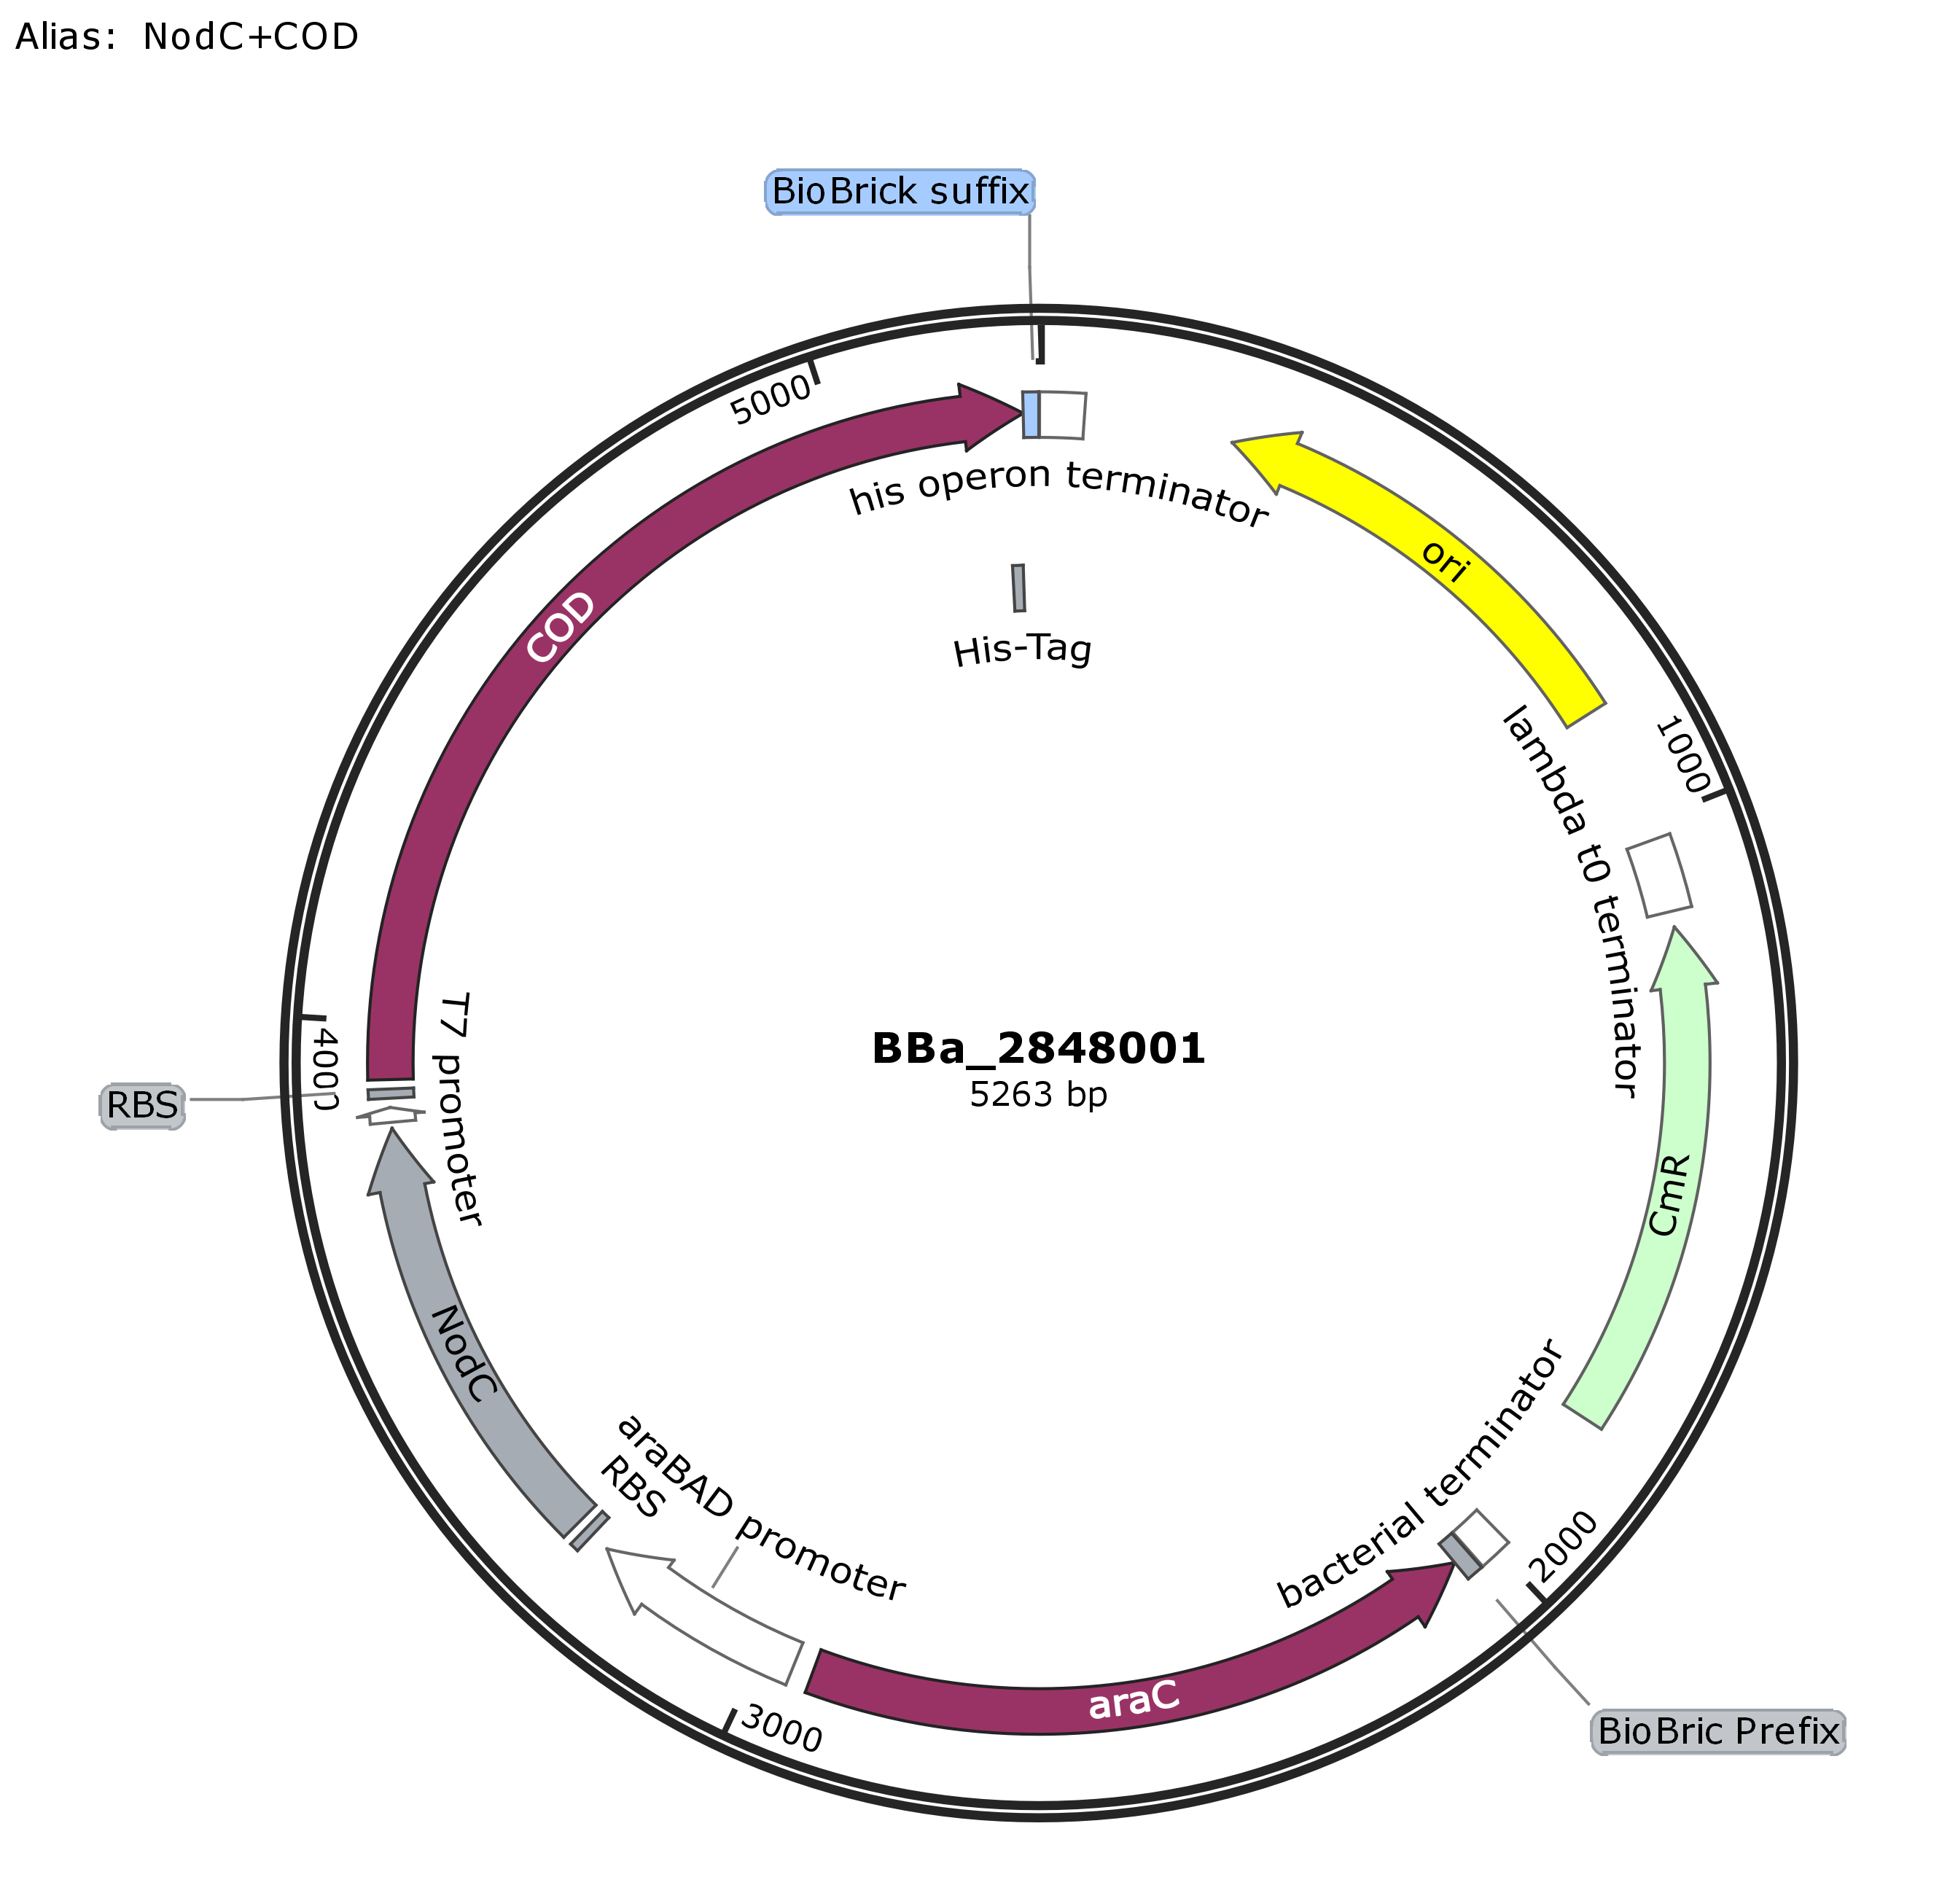 Plasmid map was created with Snapgene.